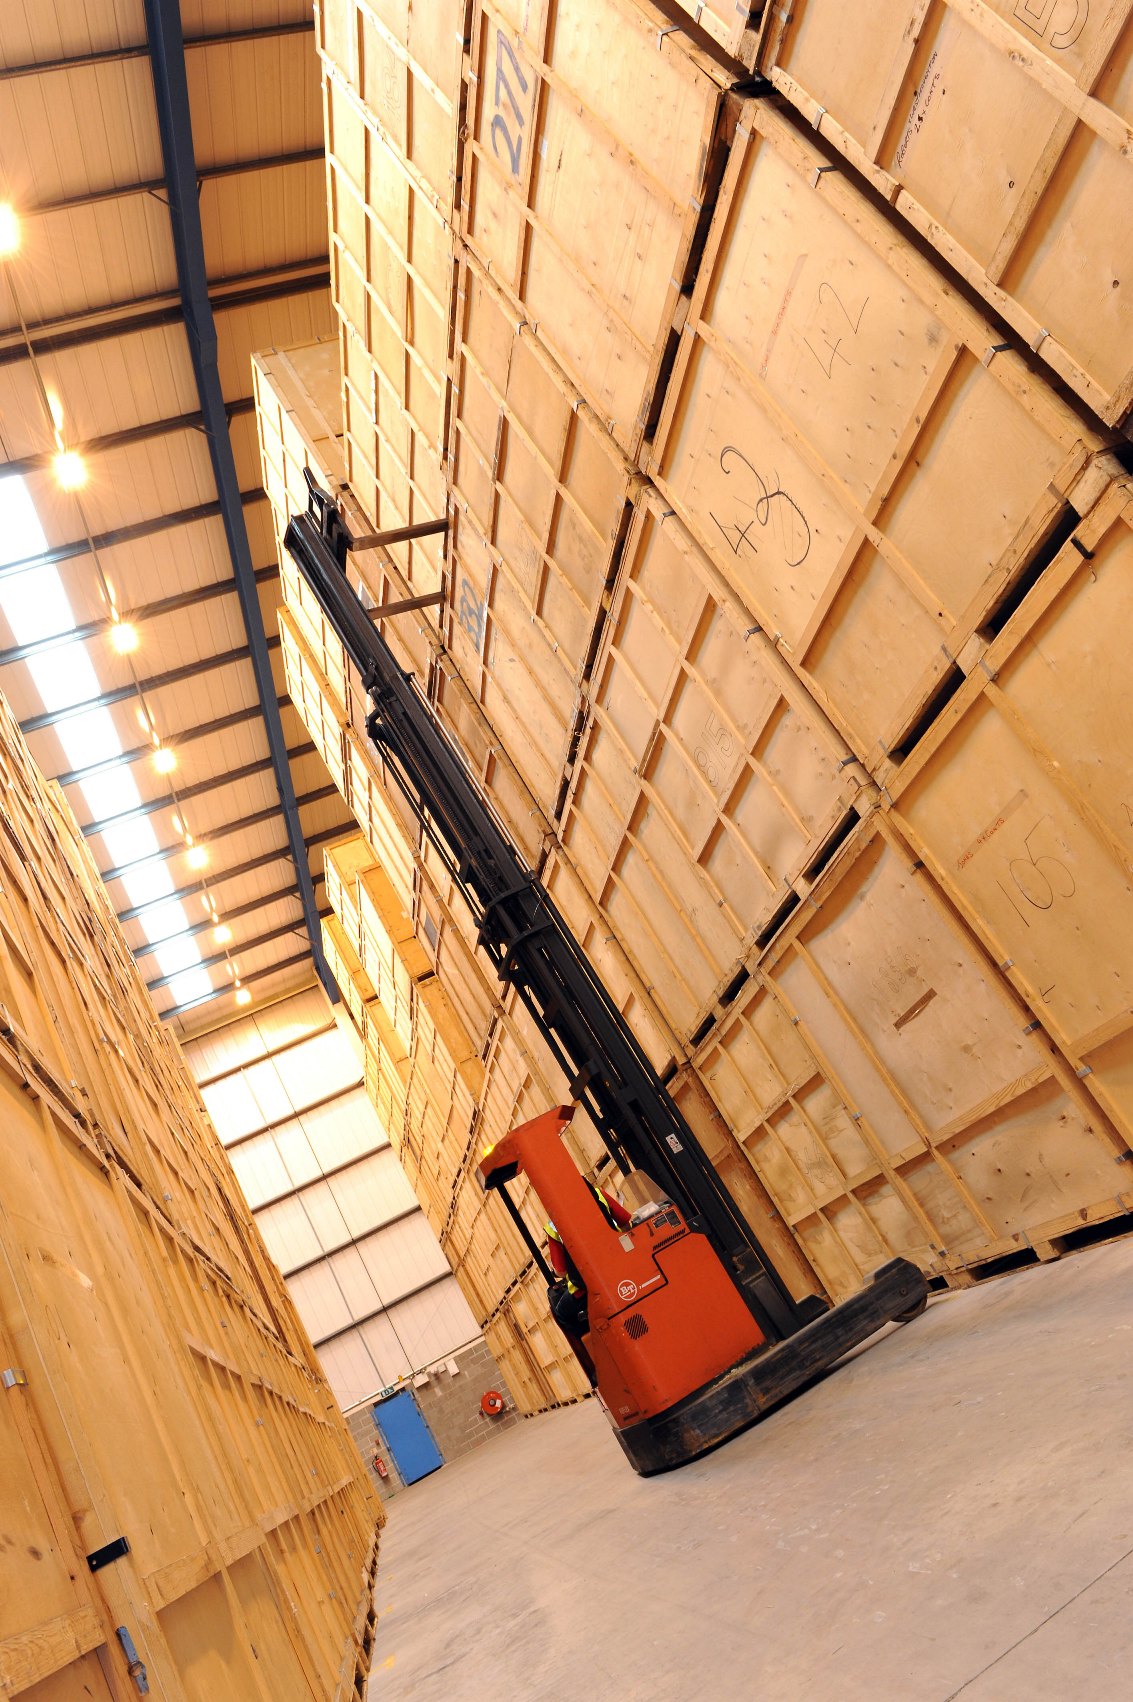 Could containerised storage be the perfect option for you and you don't know it?